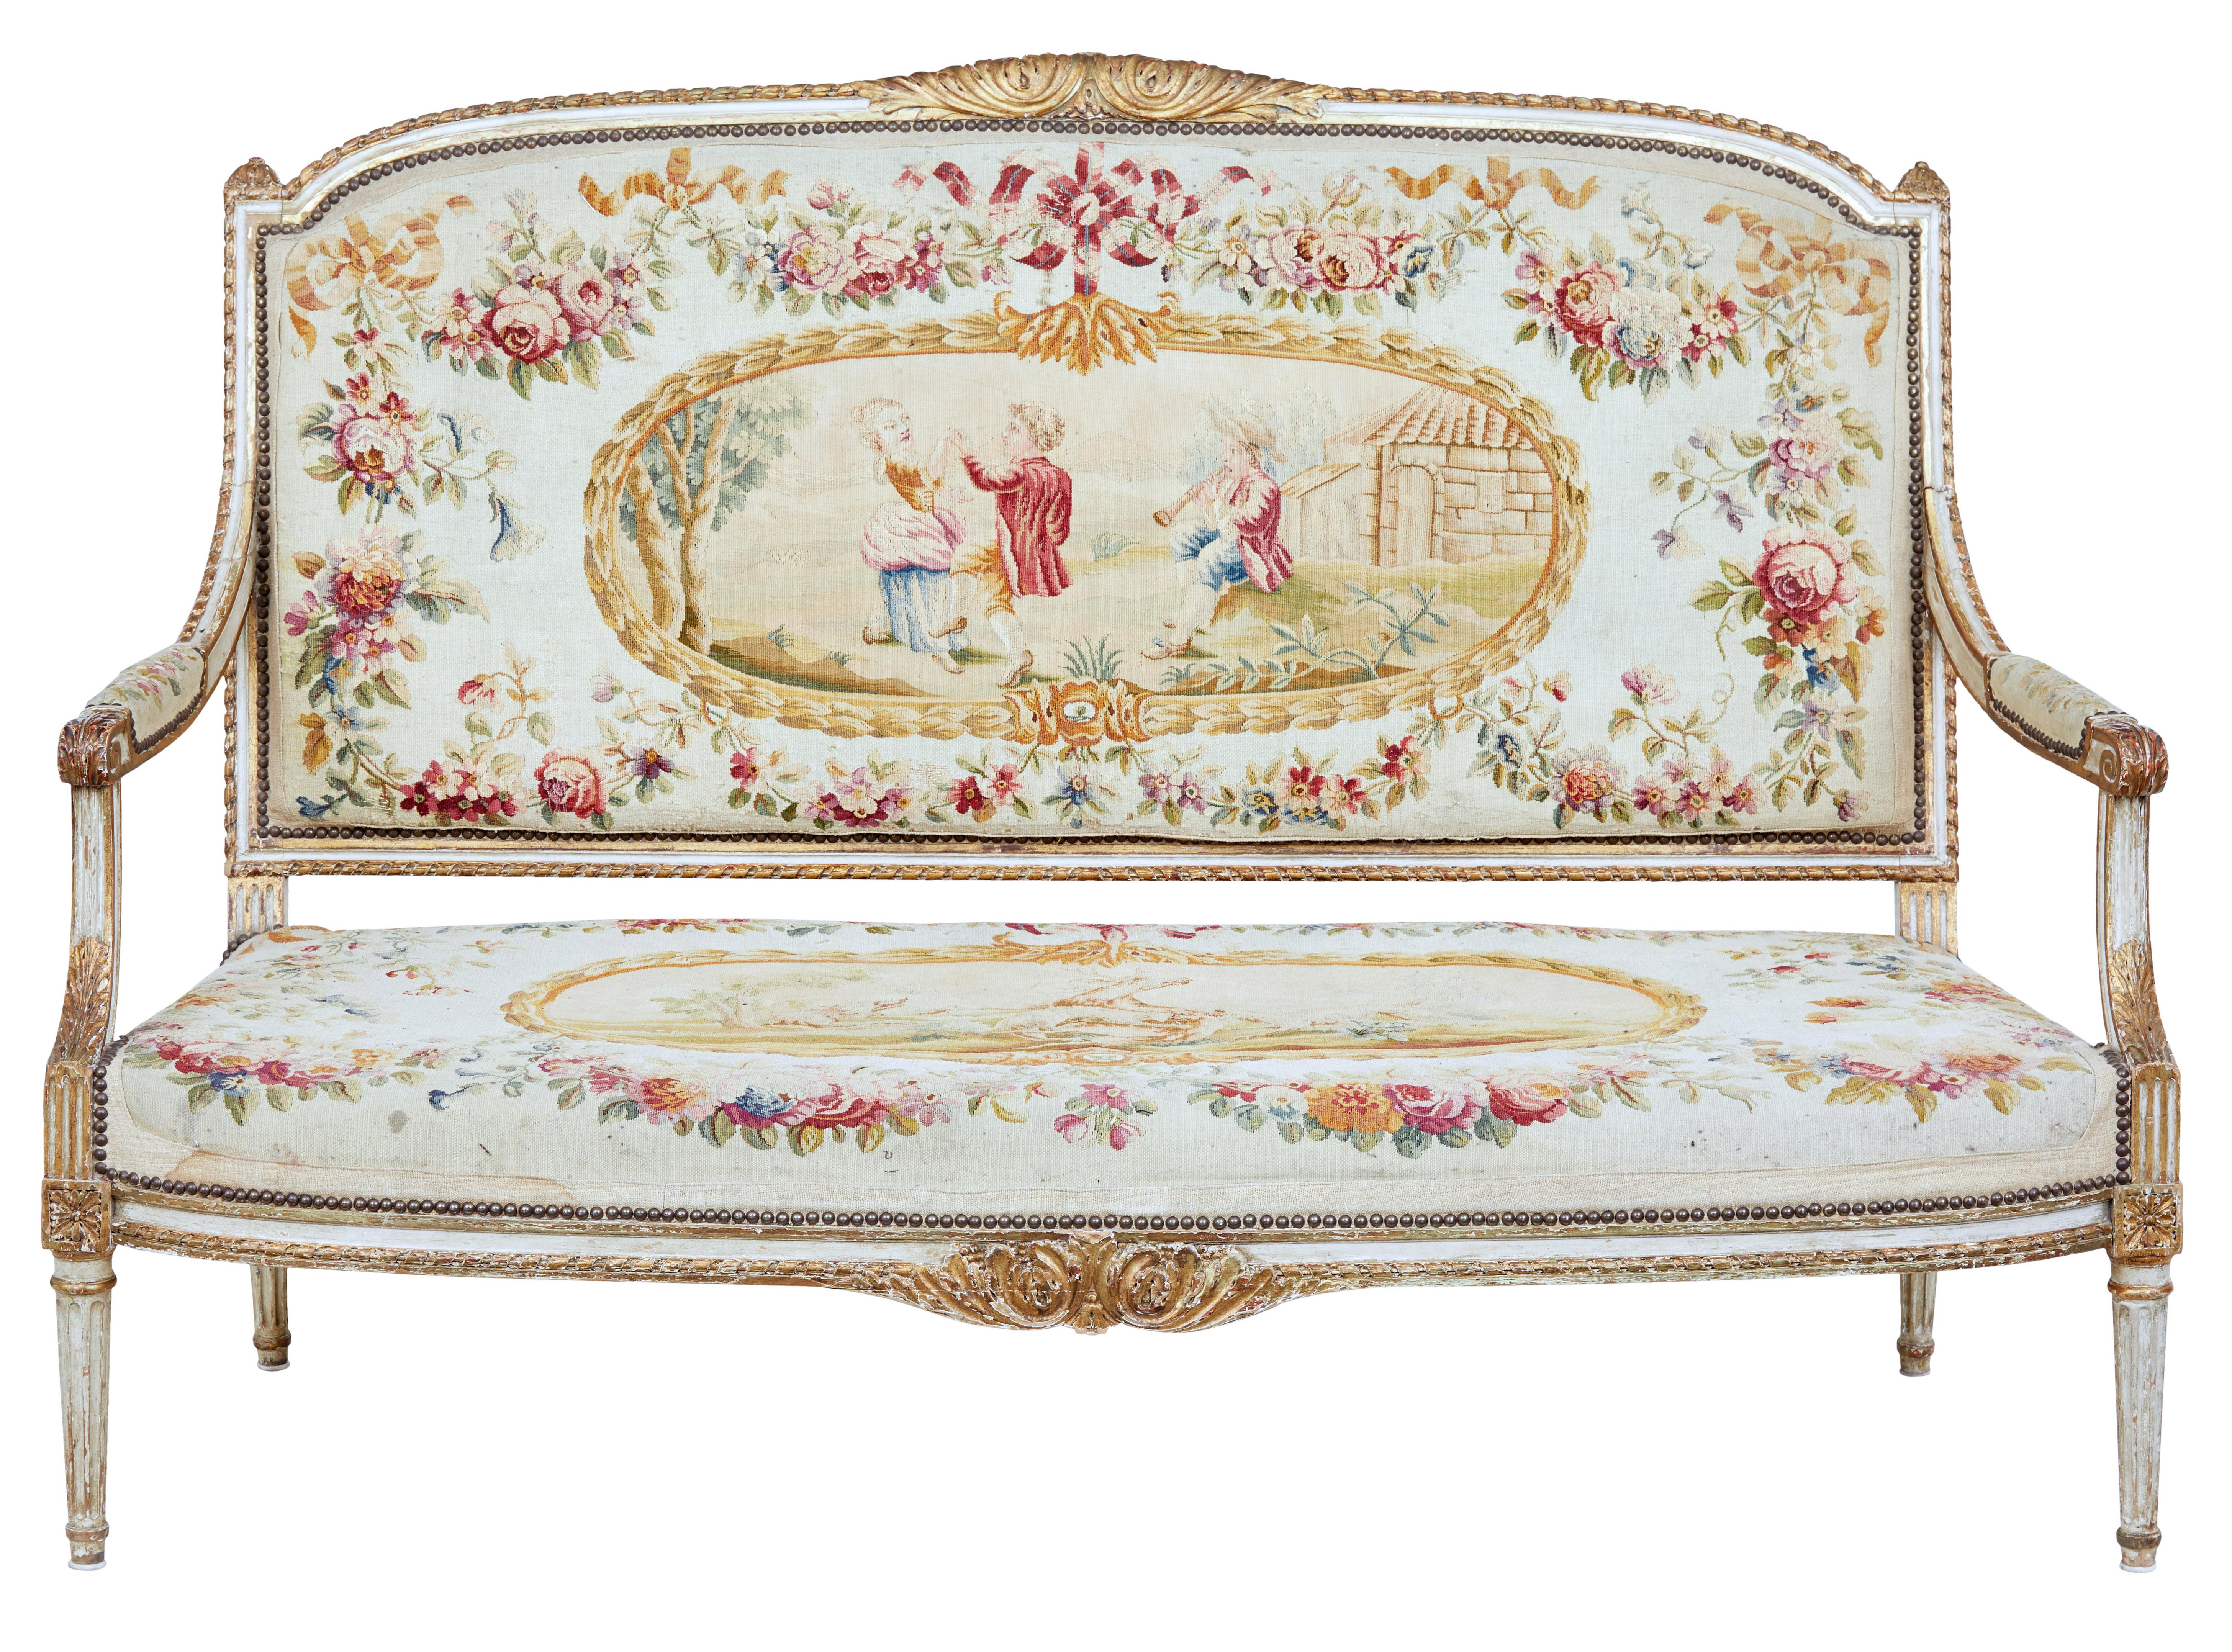 Fine quality Louis Philippe I period 5 piece gilt salon suite circa 1830.

We are pleased to offer this superb quality gilt salon suite with original tapestry covering, from the period of Louis Philippe the first of France.

Set comprises of a